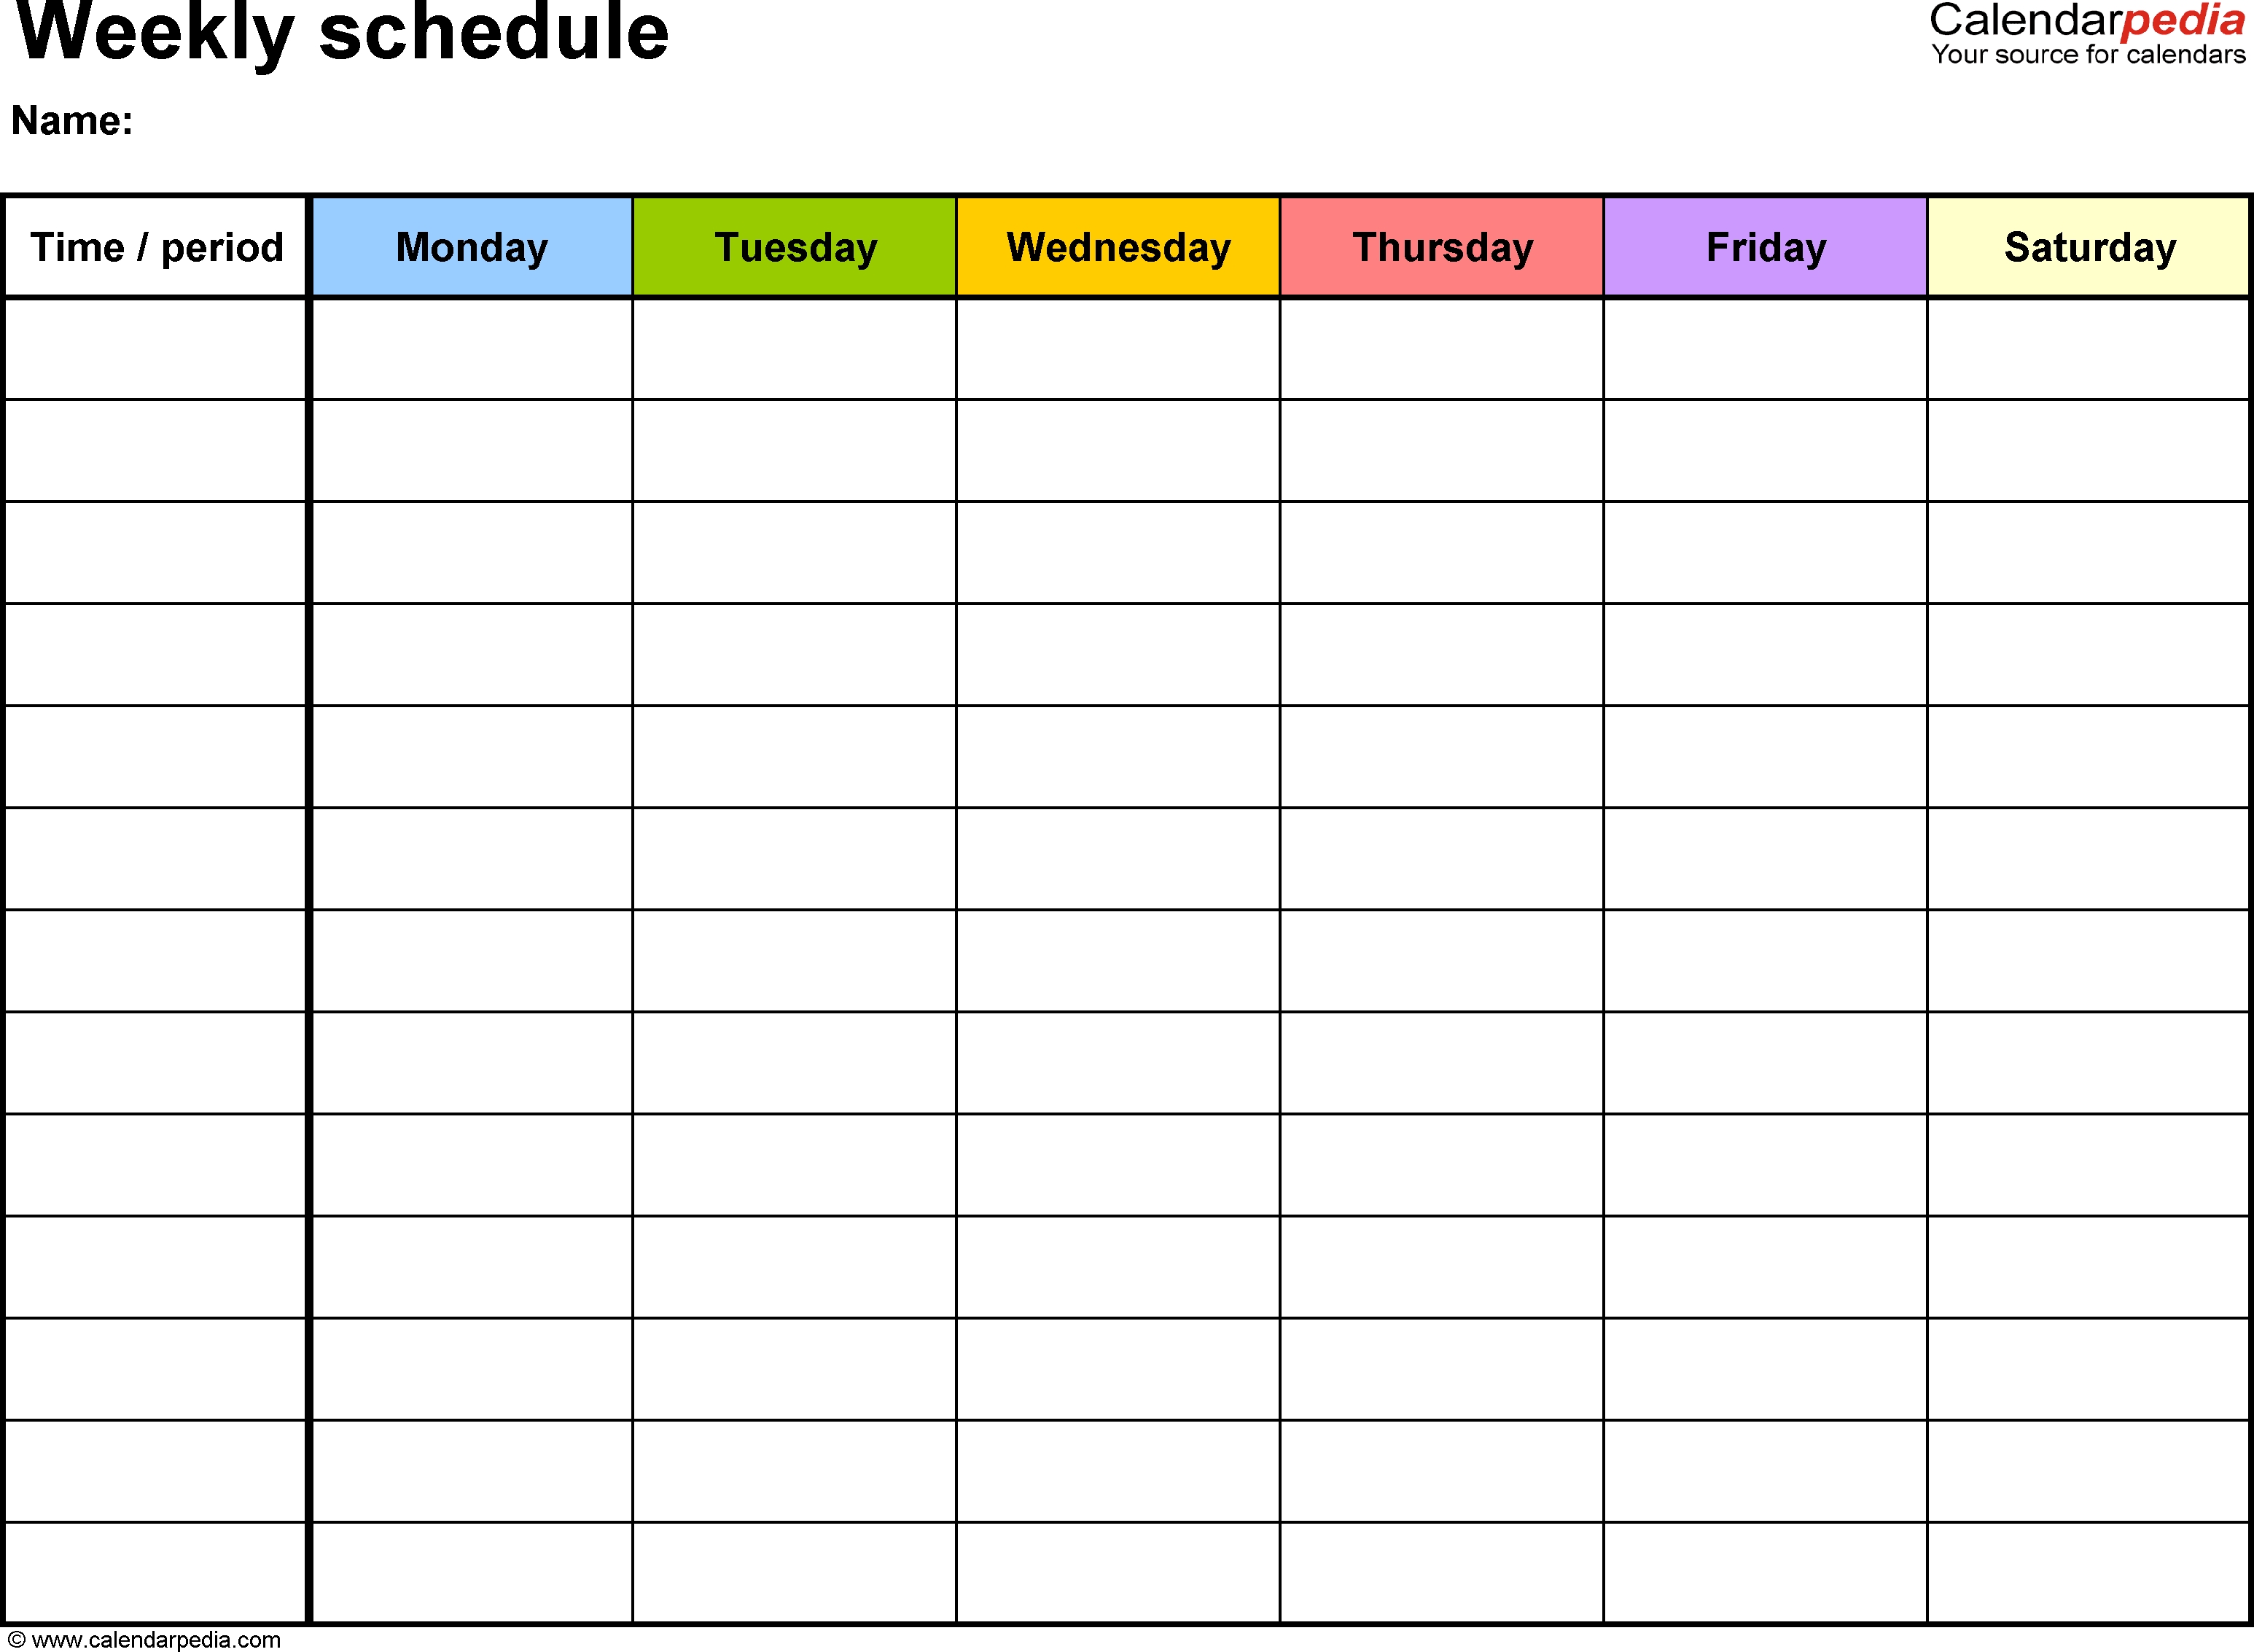 Free Weekly Schedule Templates For Word - 18 Templates-Monday To Friday Monthly Calendar Template